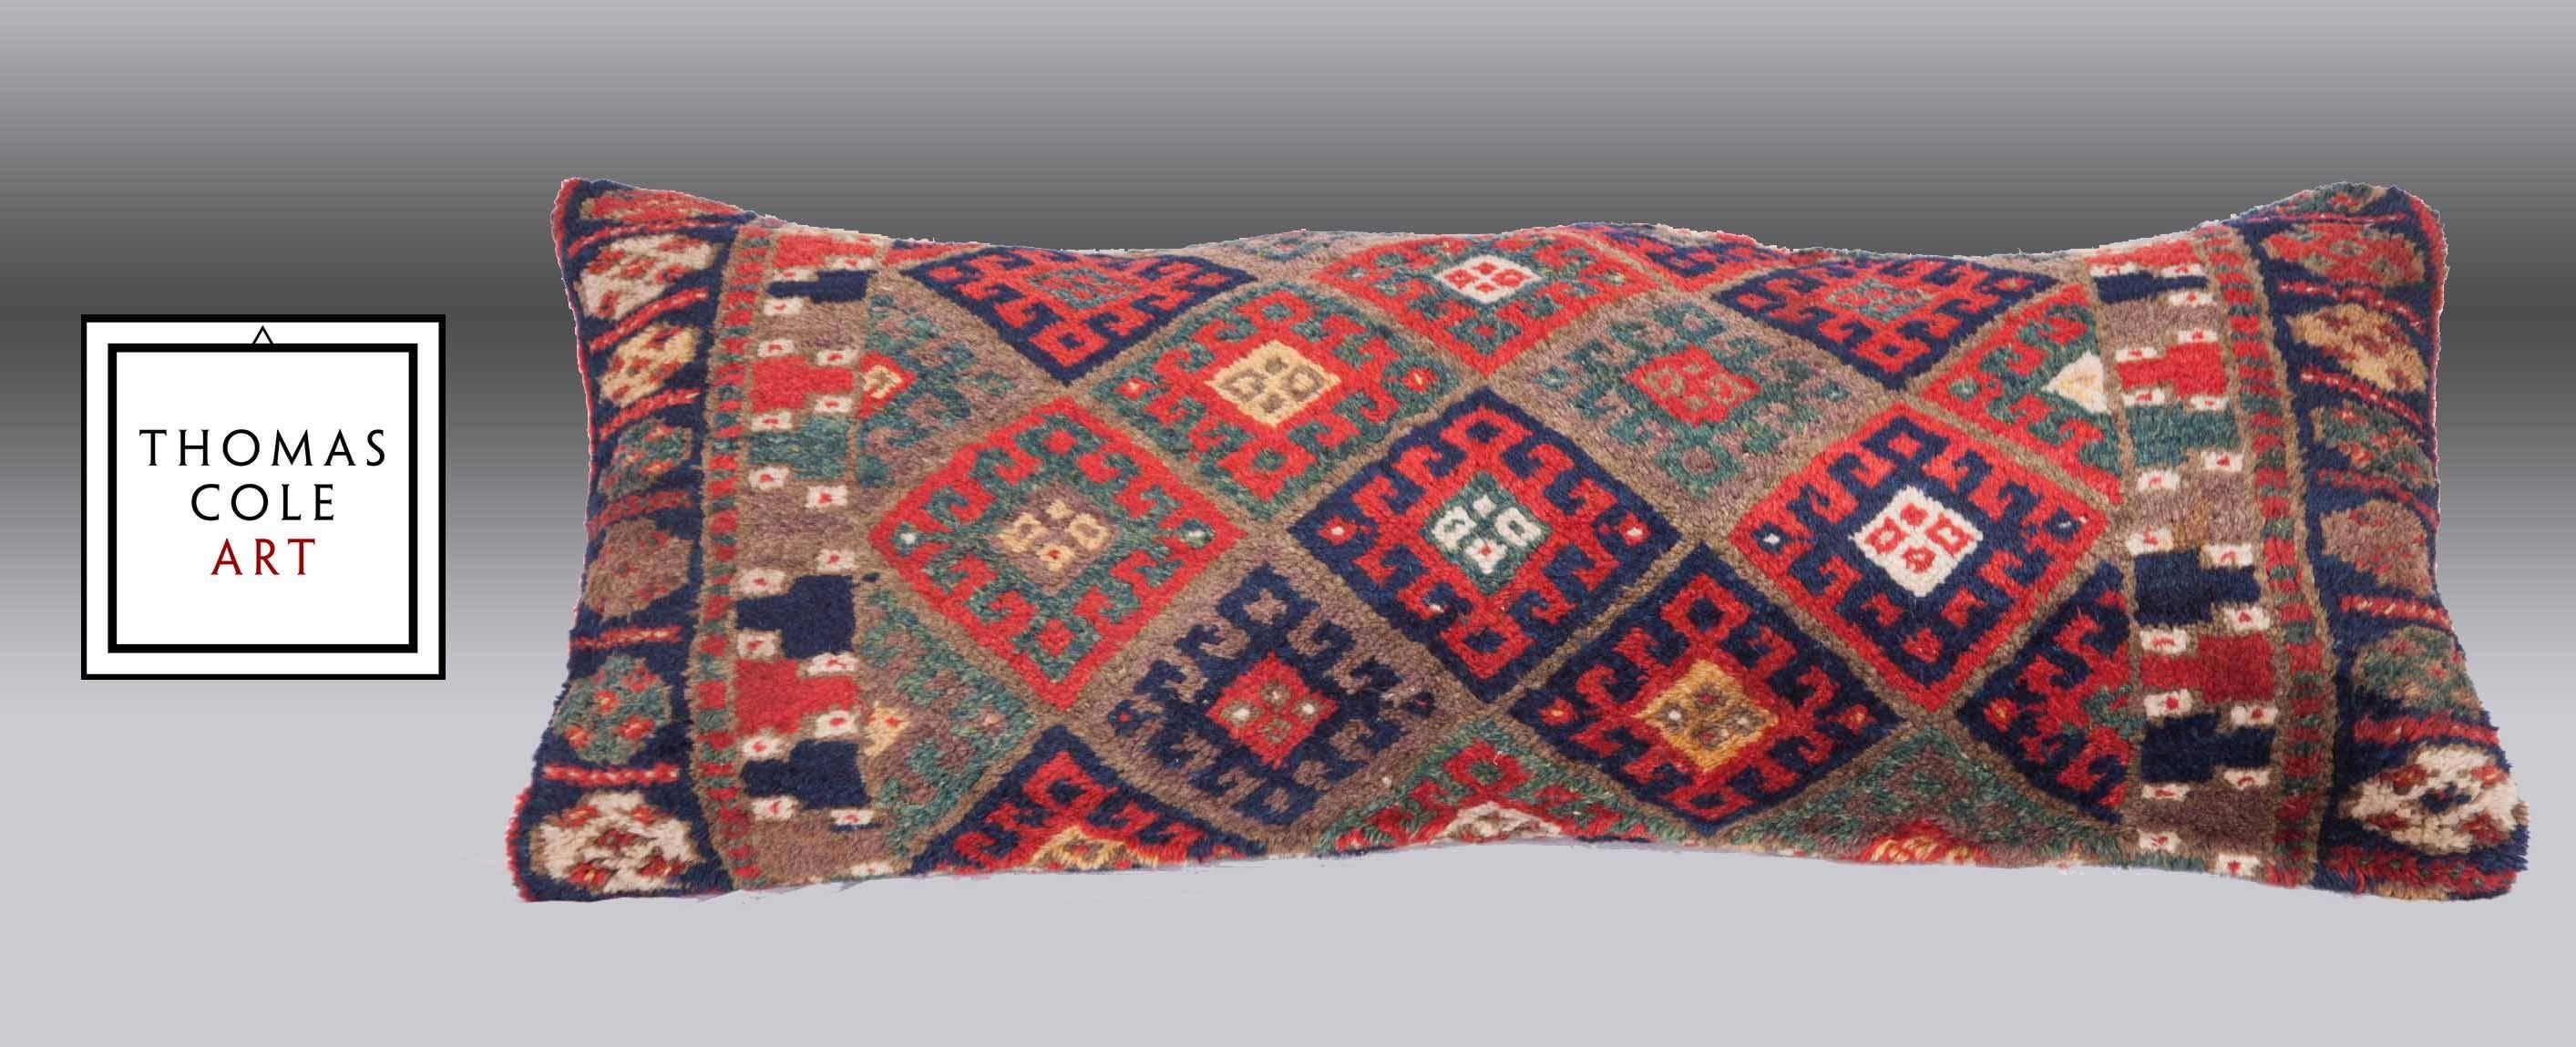 A fabulously colorful wool pile pillow composed of a rug from the Jaf Kurd people of west Persia dating to the 19th century. All the dyes are derived from natural dyes and the condition is good.

It comes with an insert to accommodate filling.